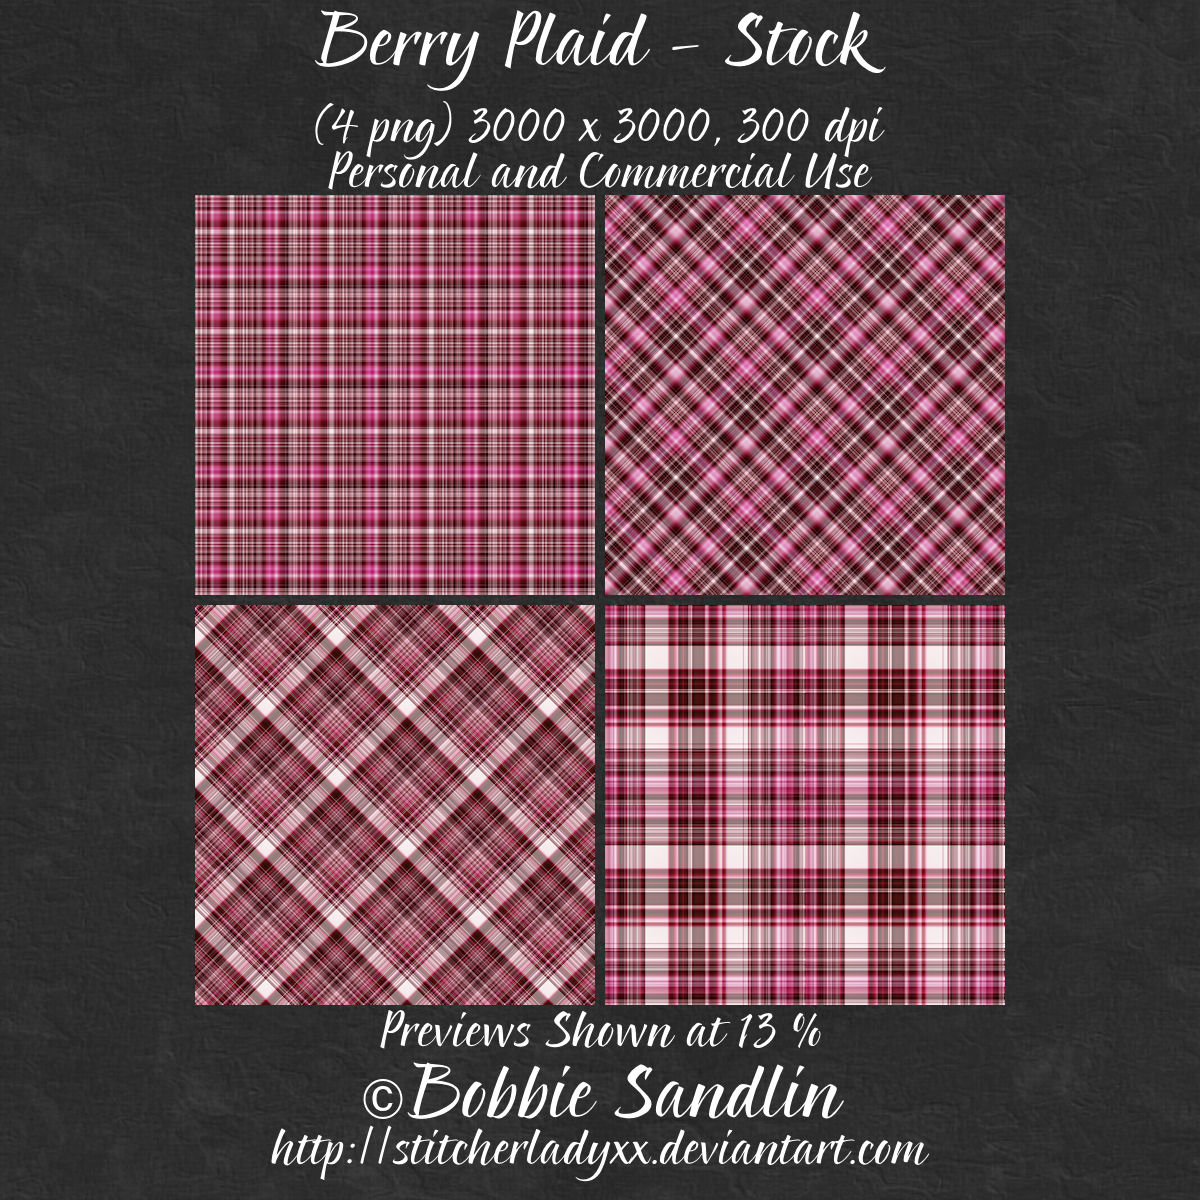 Berry Plaid - Stock Pack